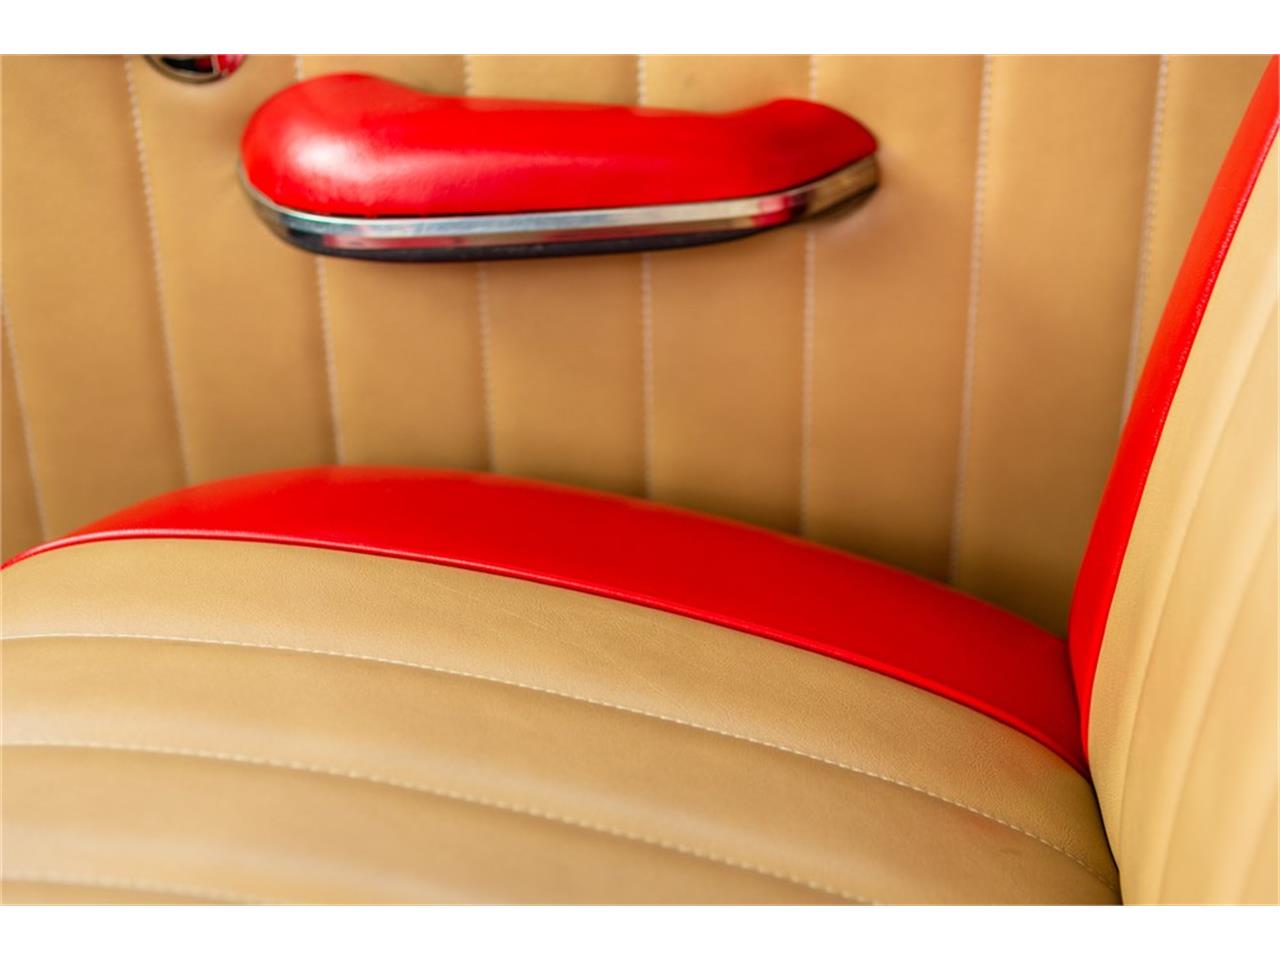 1951 Mercury 2-Dr Coupe for sale in Greeley, CO – photo 58